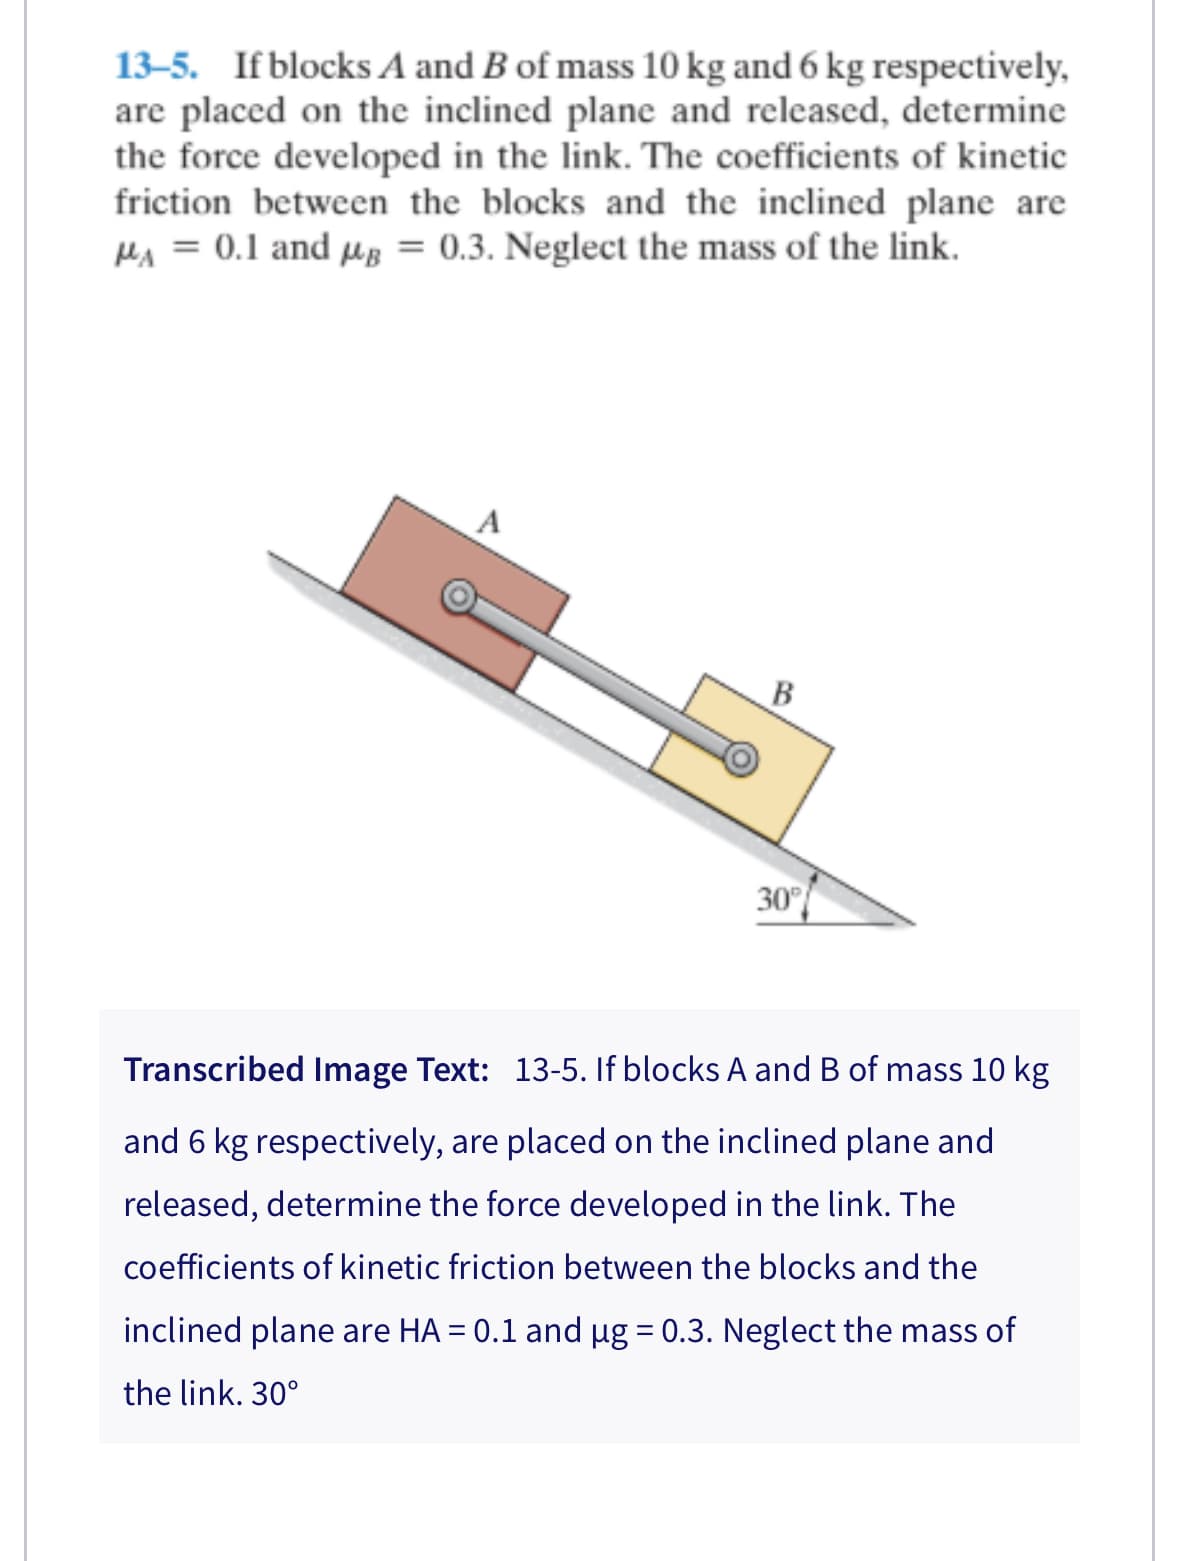 13-5. If blocks A and B of mass 10 kg and 6 kg respectively,
are placed on the inclined plane and released, determine
the force developed in the link. The coefficients of kinetic
friction between the blocks and the inclined plane are
MA = 0.1 and μg = 0.3. Neglect the mass of the link.
A
B
30°
Transcribed Image Text: 13-5. If blocks A and B of mass 10 kg
and 6 kg respectively, are placed on the inclined plane and
released, determine the force developed in the link. The
coefficients of kinetic friction between the blocks and the
inclined plane are HA = 0.1 and µg = 0.3. Neglect the mass of
the link. 30°